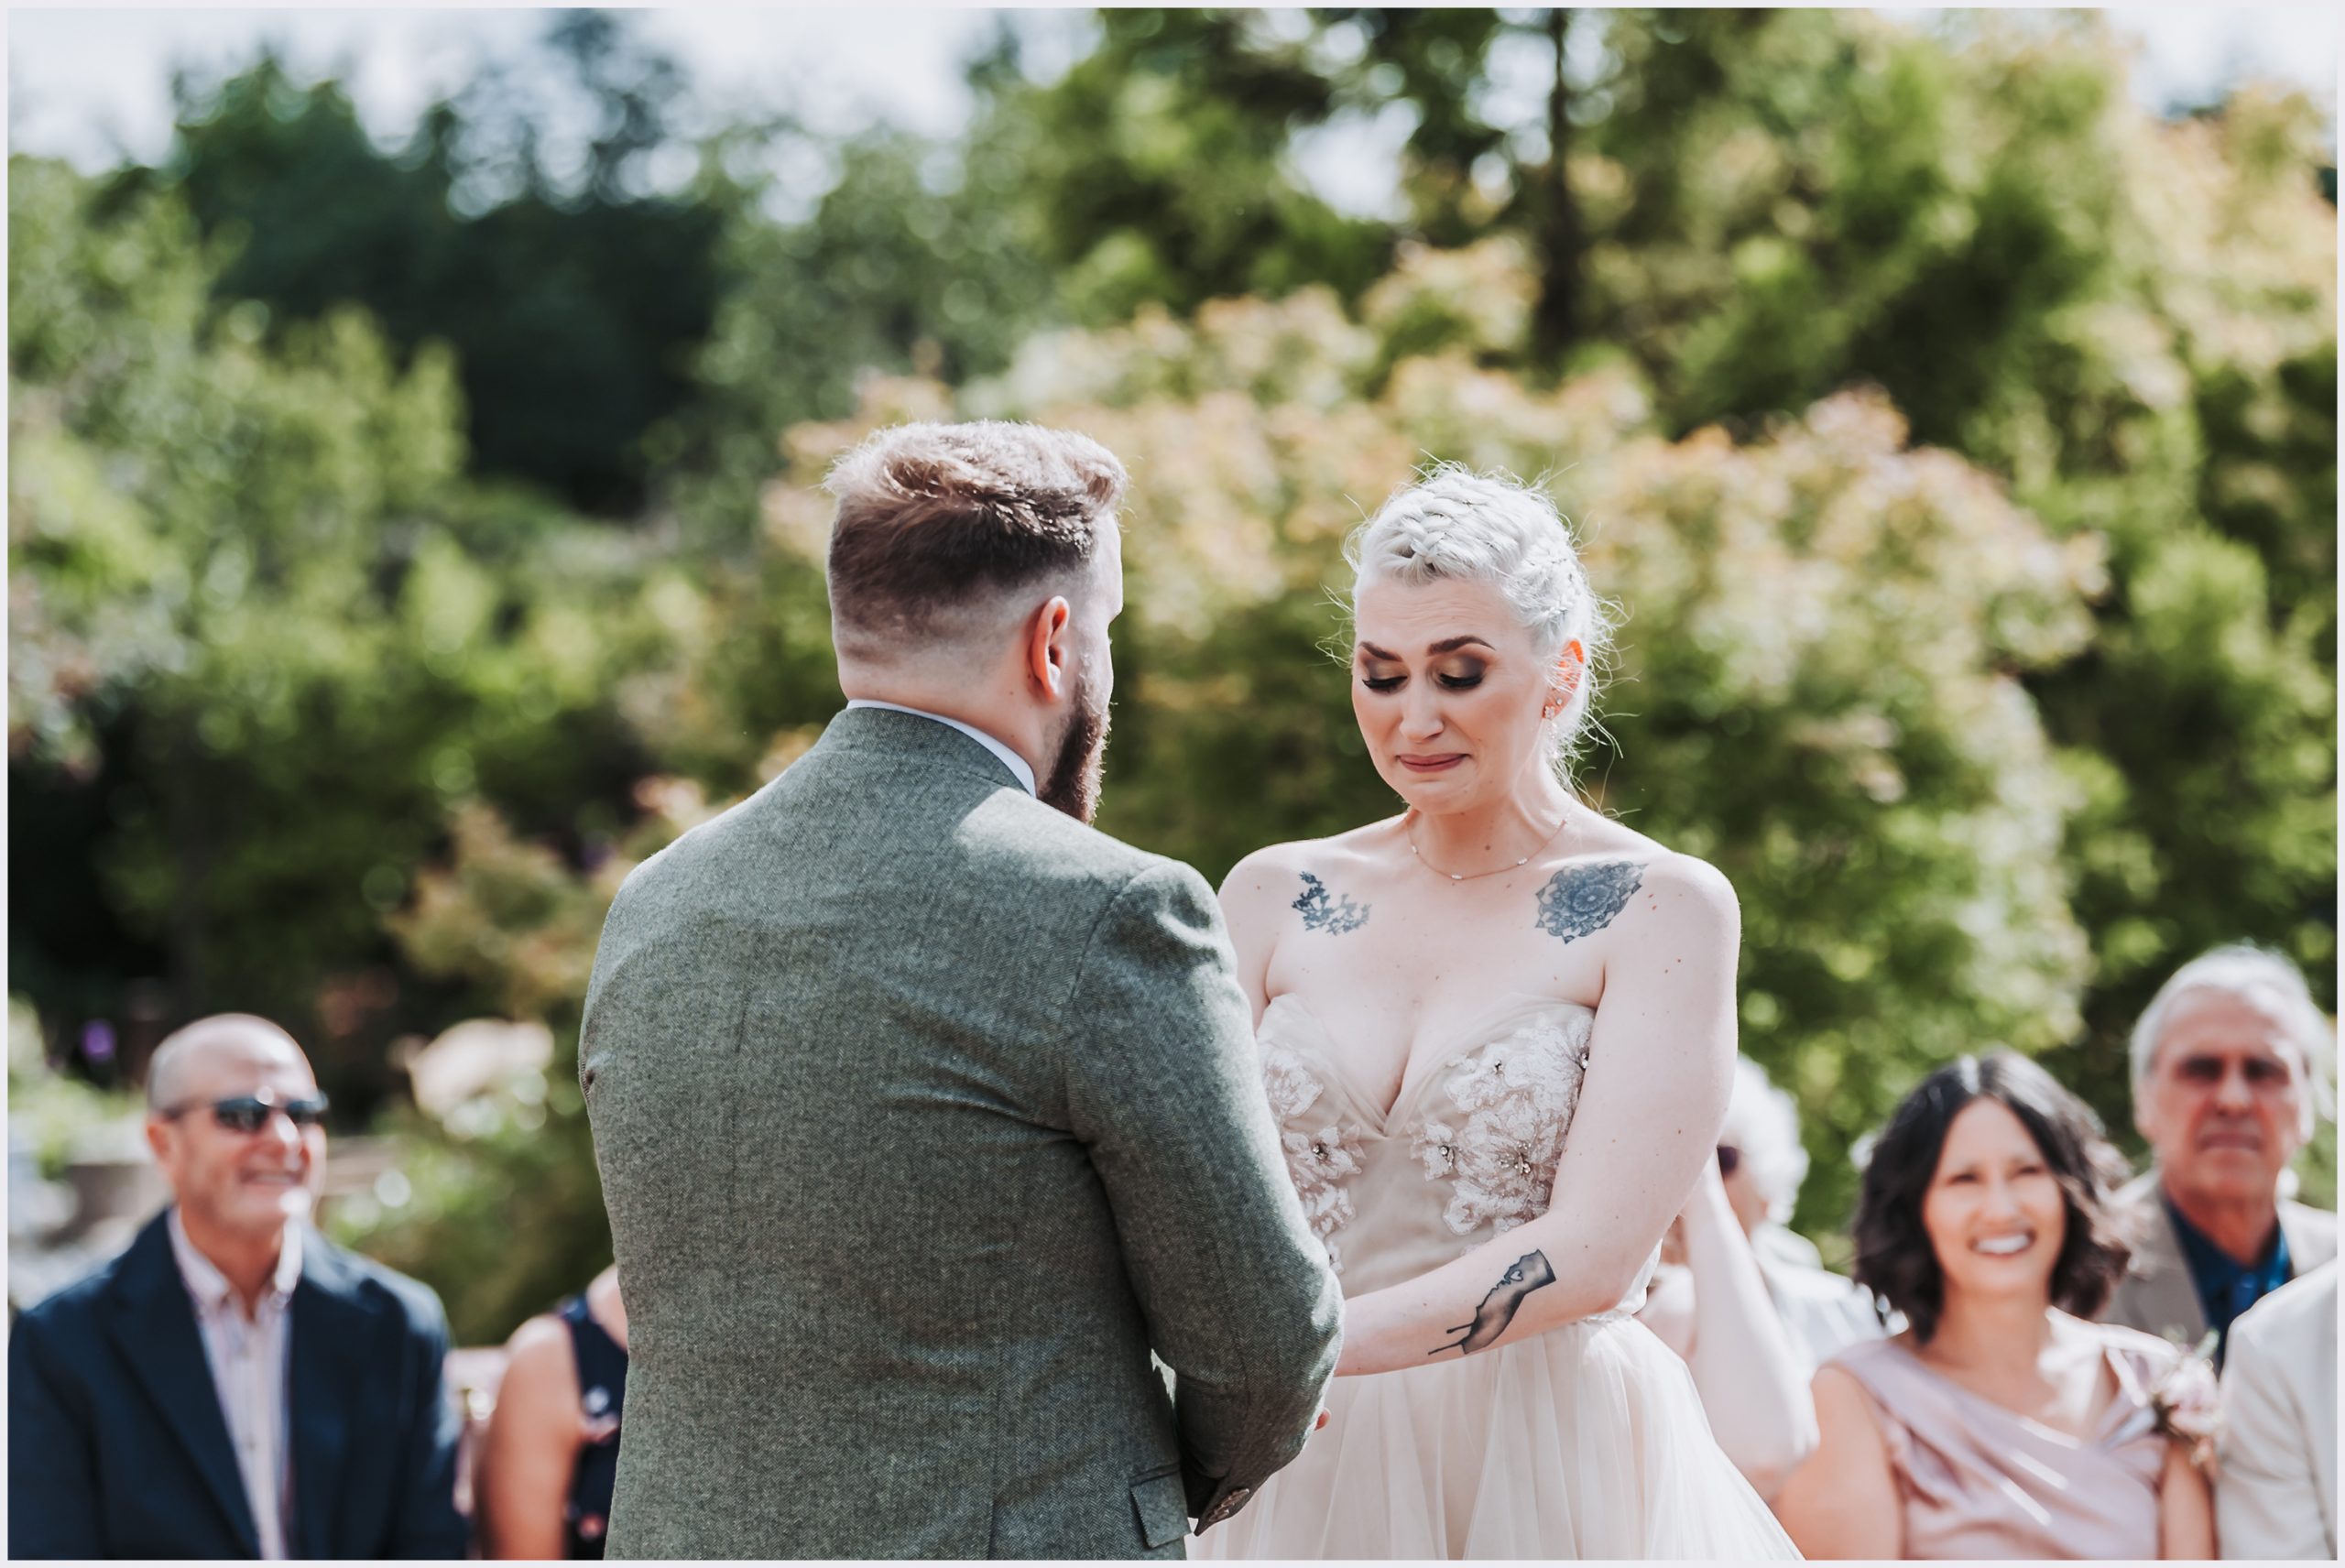 An emotional bride holding back tears of happiness as her fiance repeats his vows during their wedding ceremony.  Guests are in the background smiling happily as they witness the ceremony.  Image captured by Helena Jayne Photography, Cheshire wedding photographer